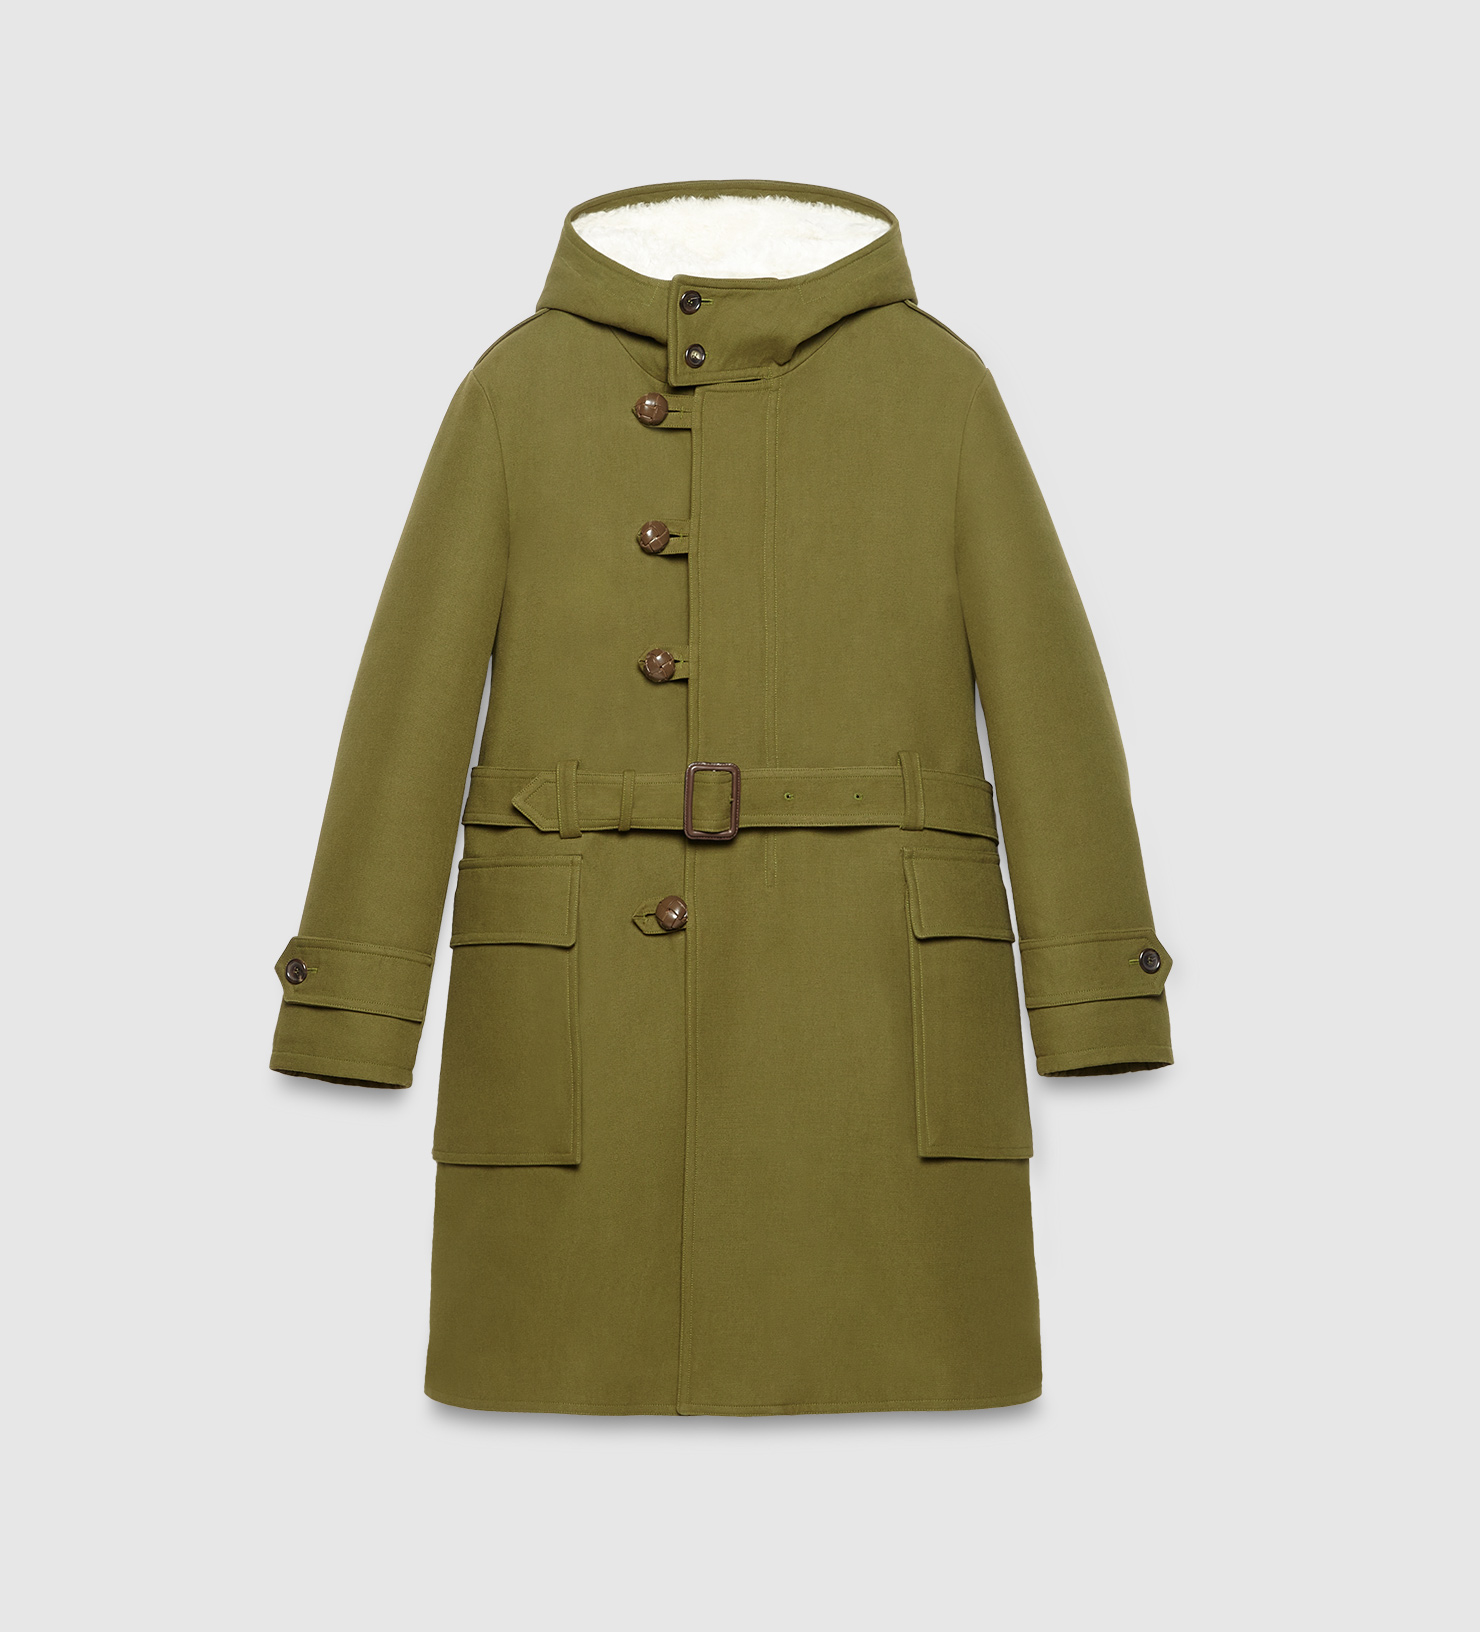 Lyst - Gucci Wool Cotton Canvas Coat in Green for Men